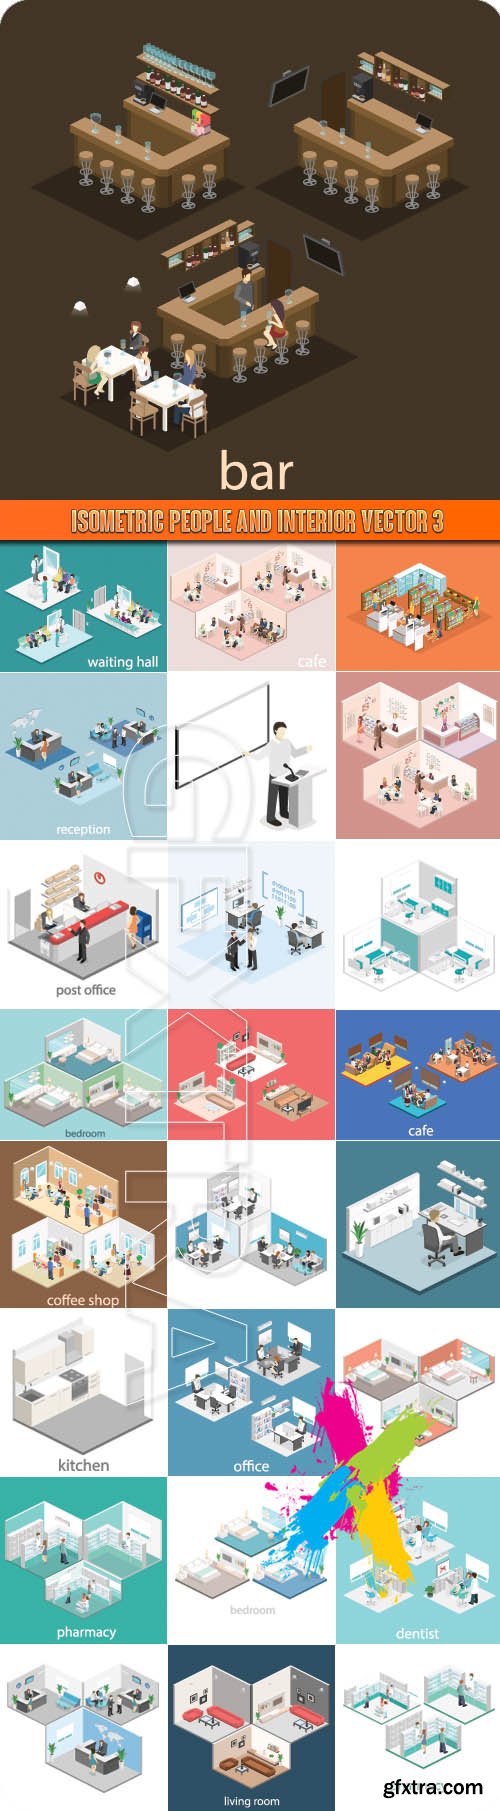 Isometric people and interior vector 3